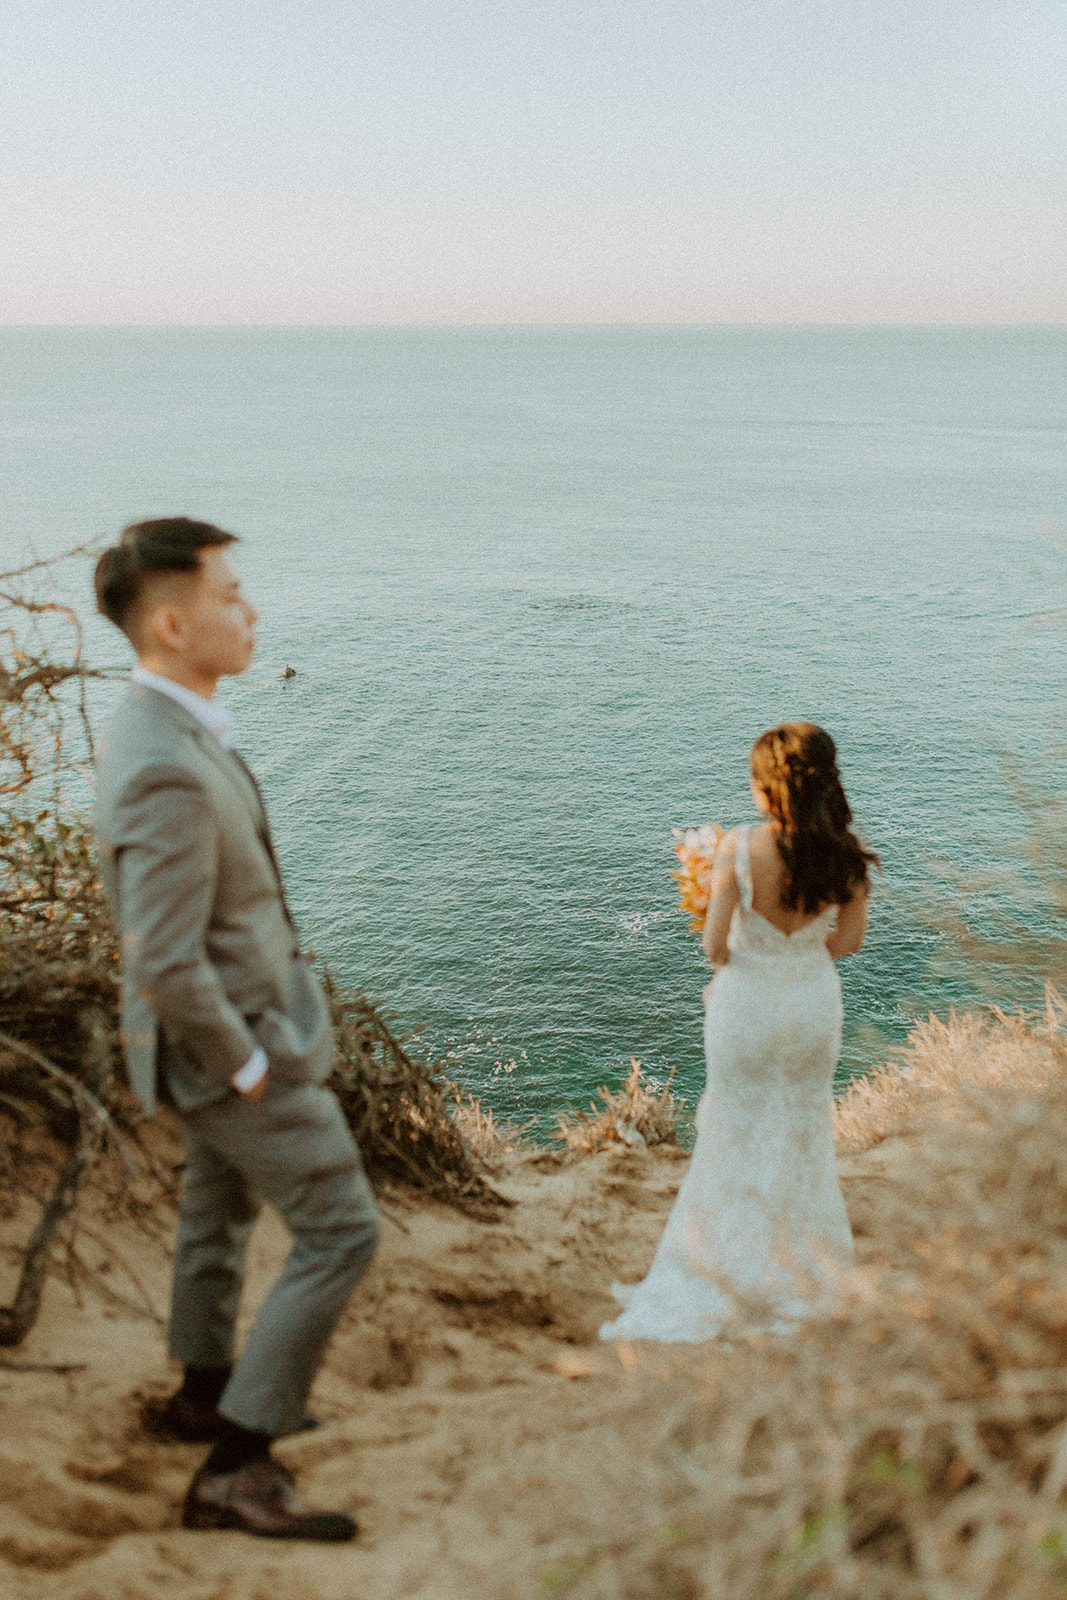 editorial shot of the bride and groom standing on the cliffside